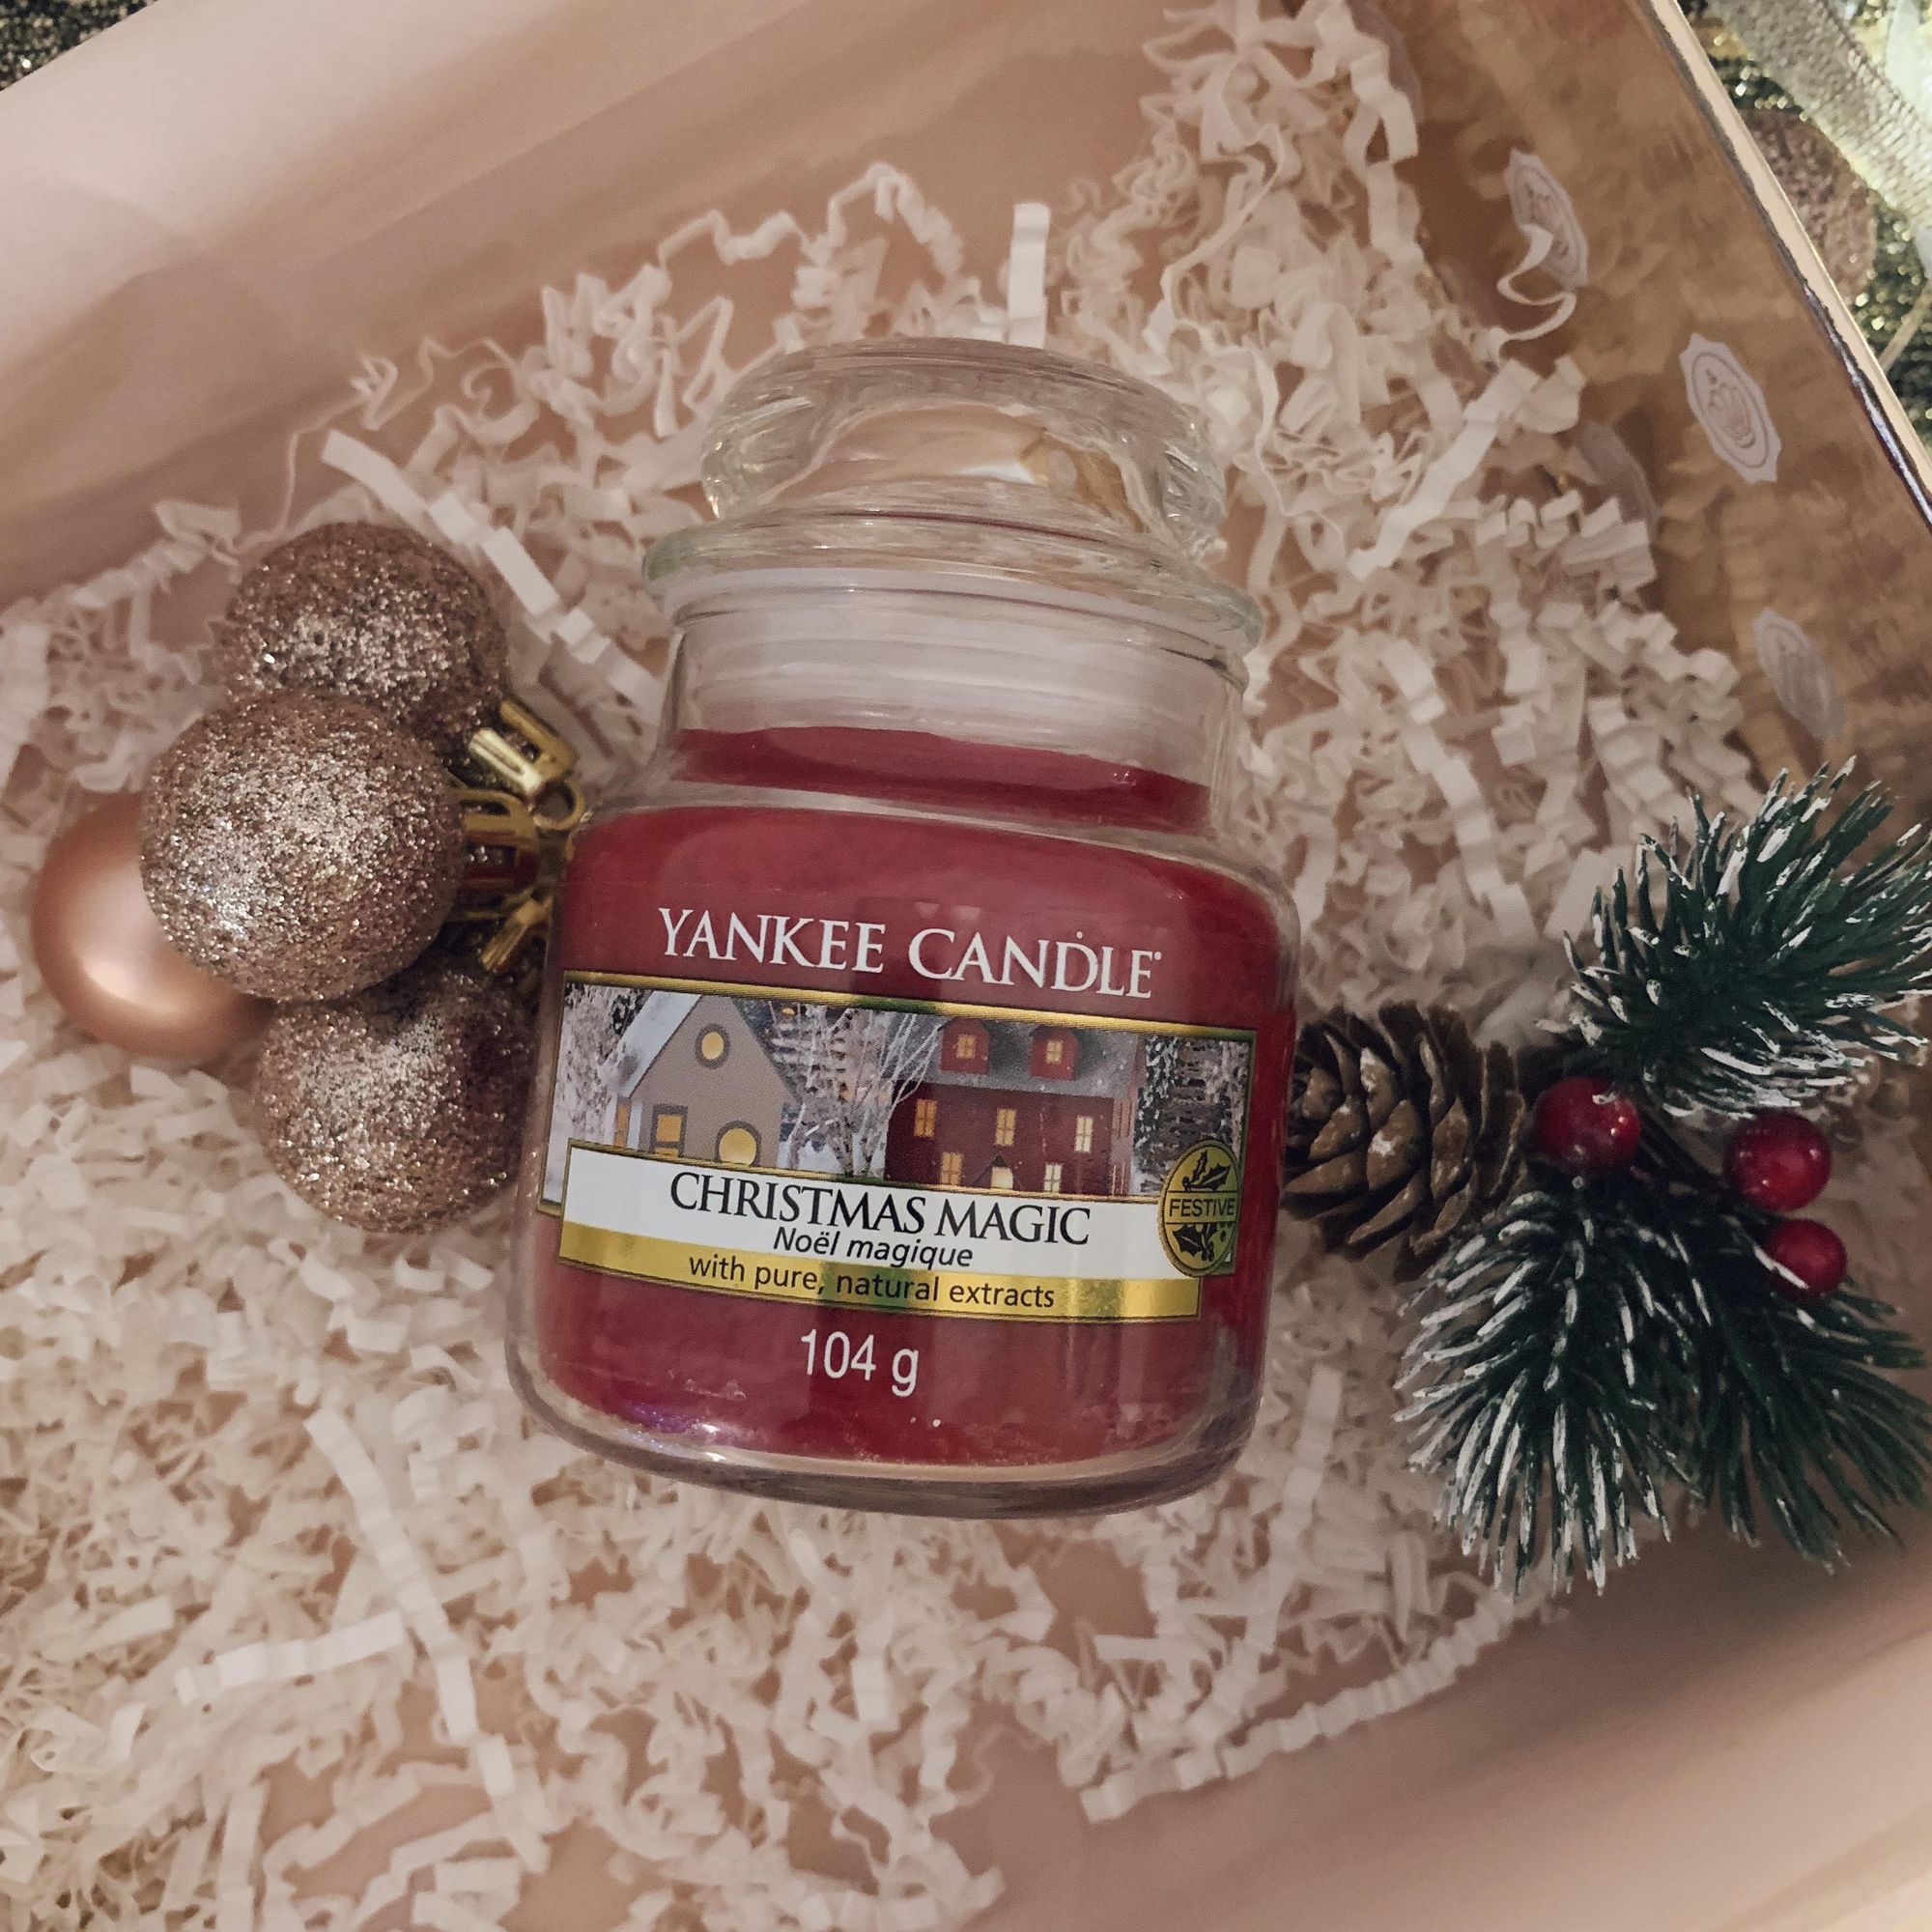 Yankee Candle Small Jar Candle - Christmas Magic - Glossybox Christmas Limited Edition - Miss Boux